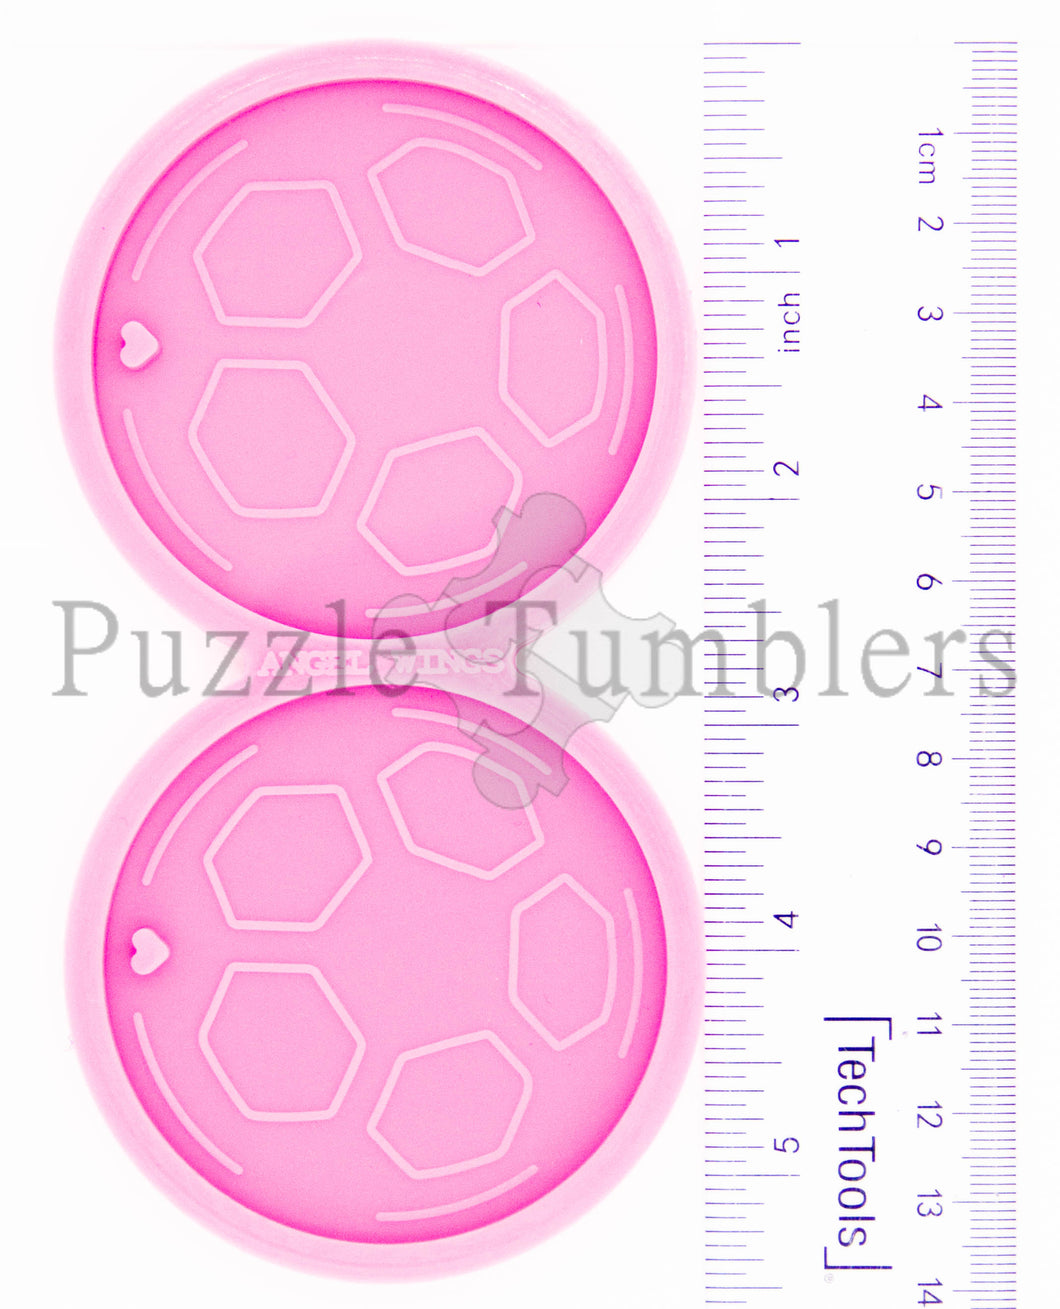 NEW Double Soccer Mold $6.25